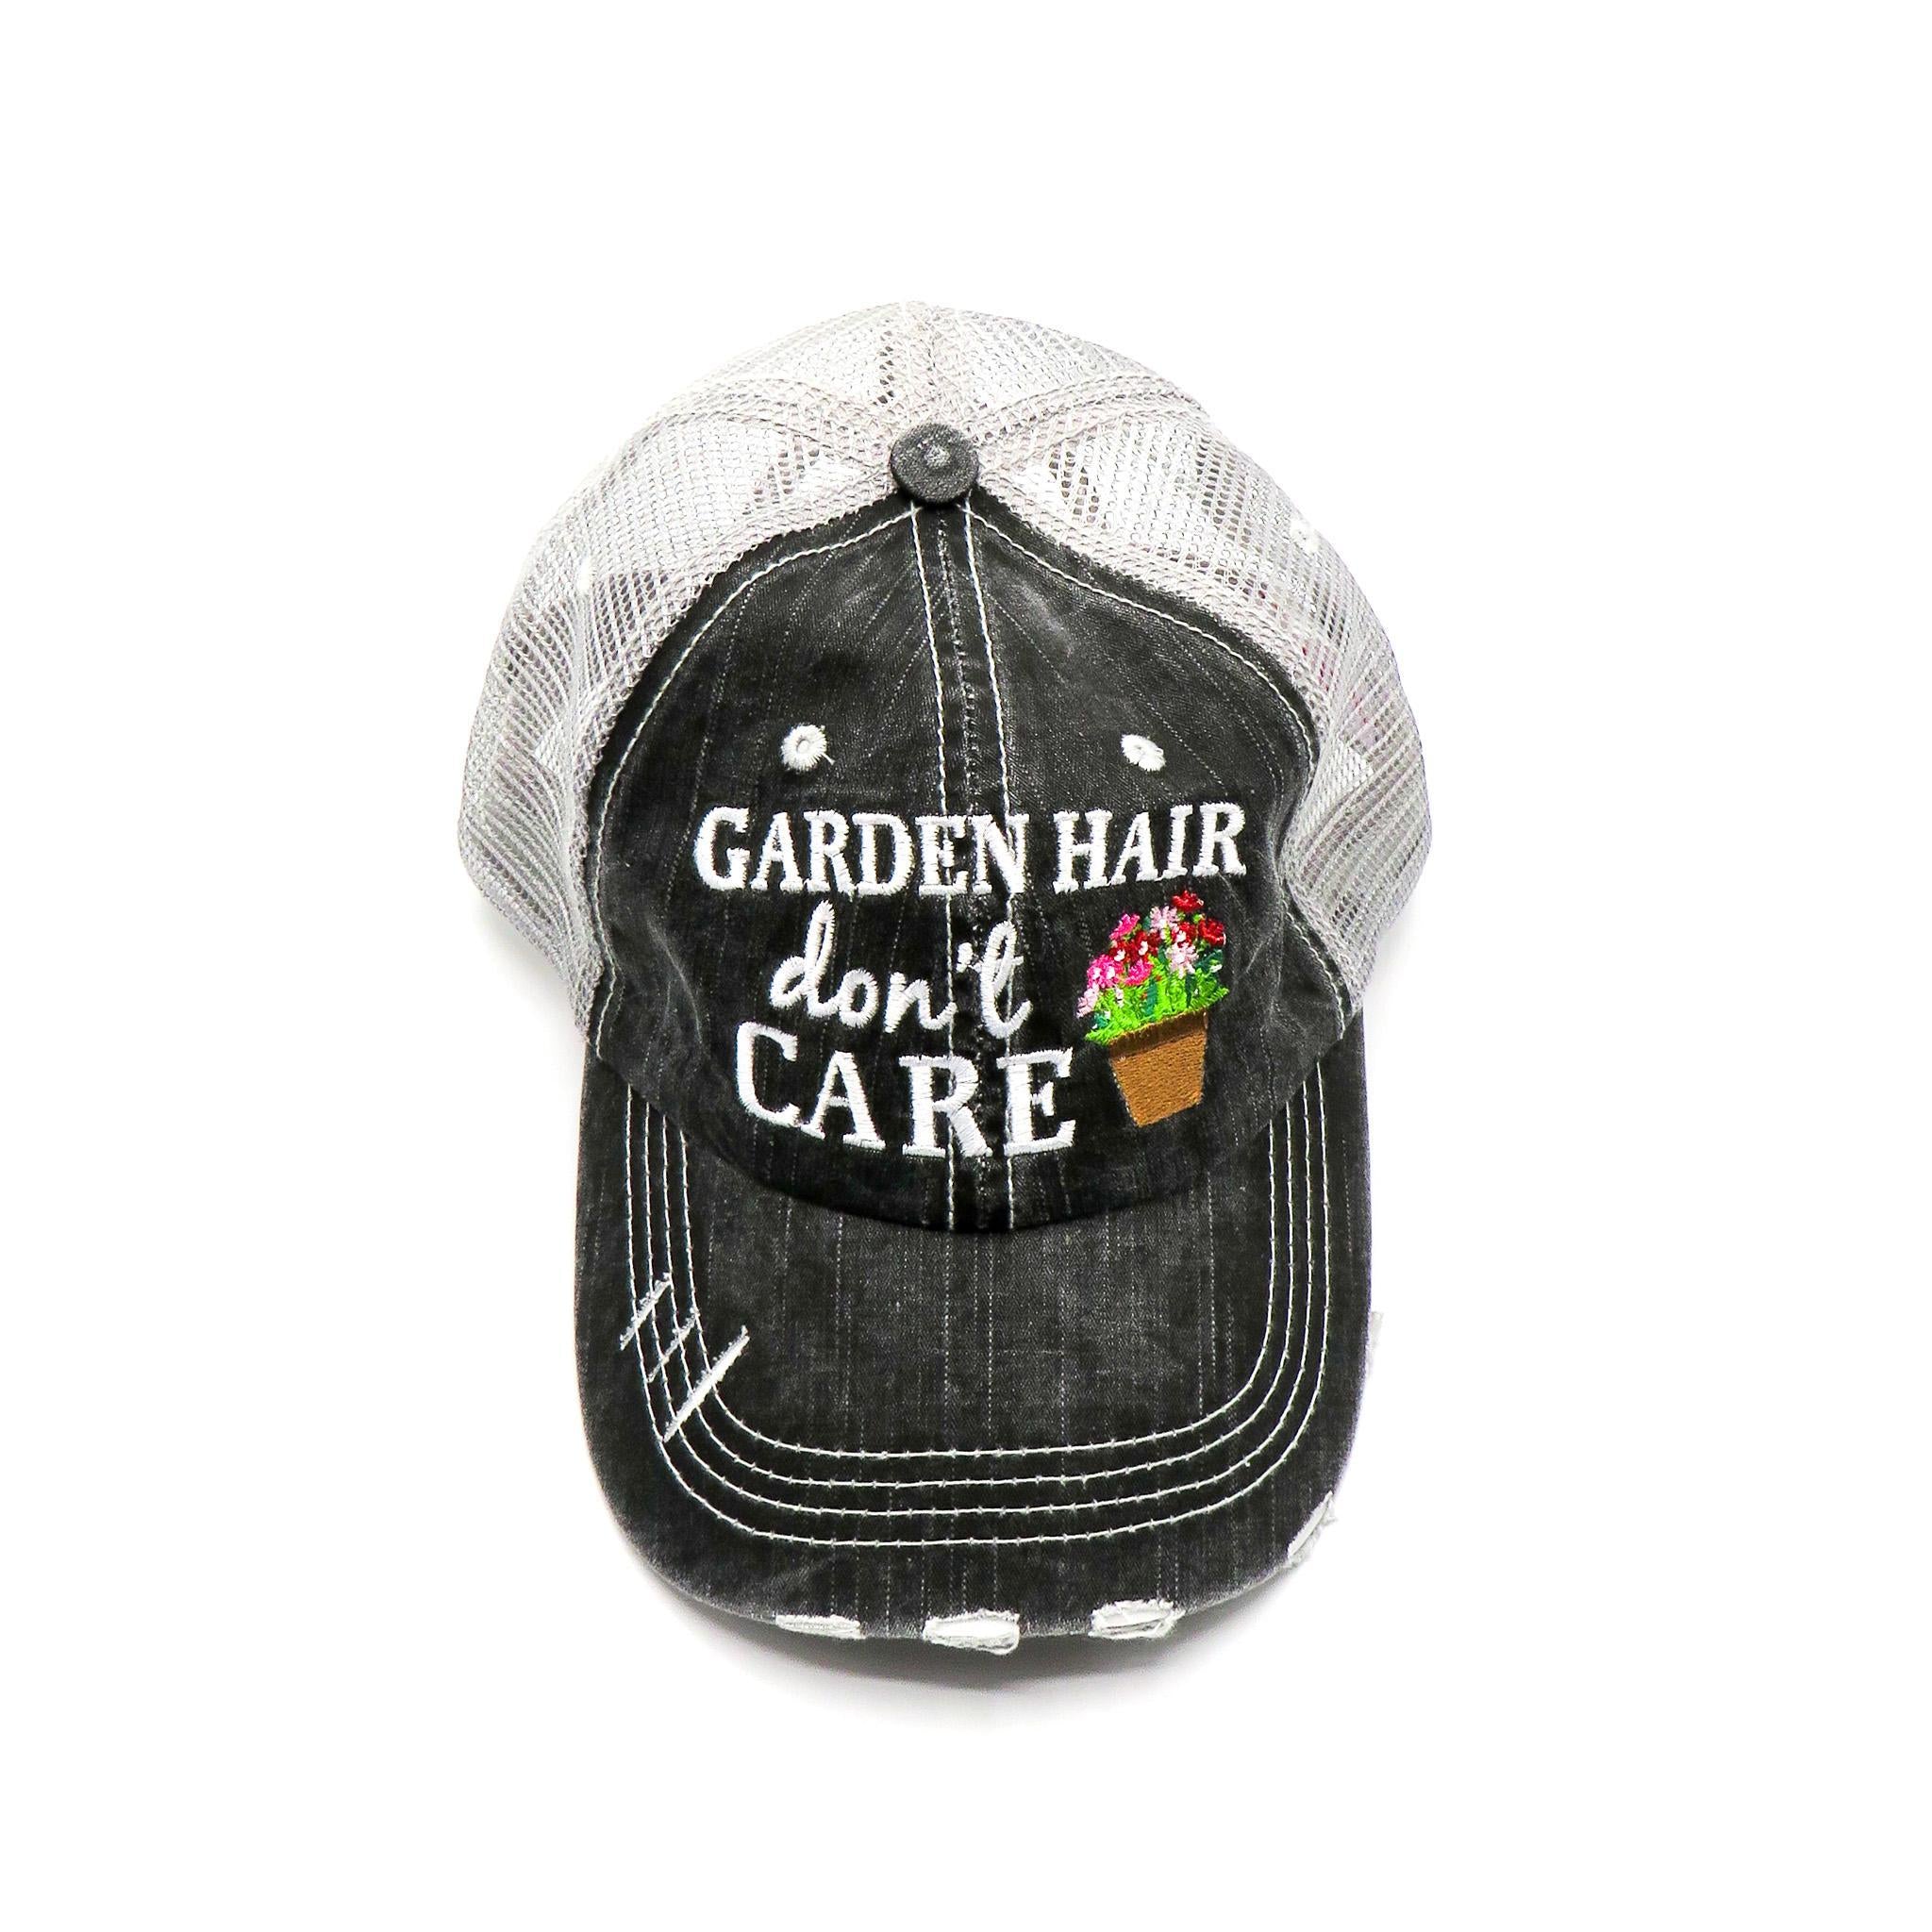 Garden Hair Don't Care Hat - Port Gamble General Store & Cafe